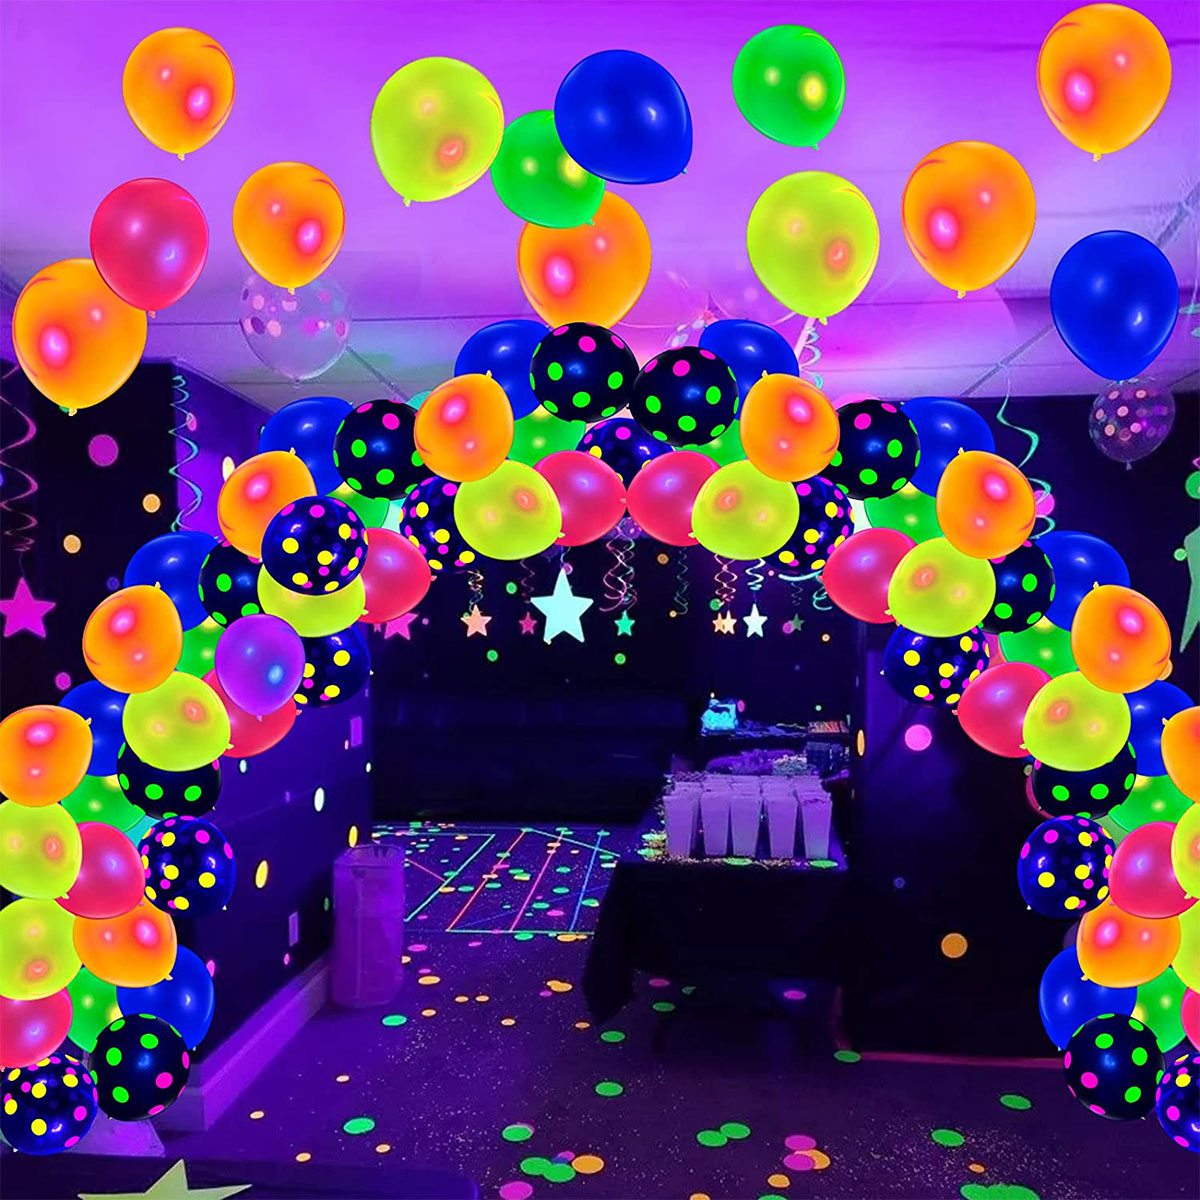 Lieonvis 90 Pieces 12 inch Glow Balloons Neon Party Supplies Decorations  Balloons,Glow in the Dark Polka Dots Balloons for Birthday,Wedding,Neon